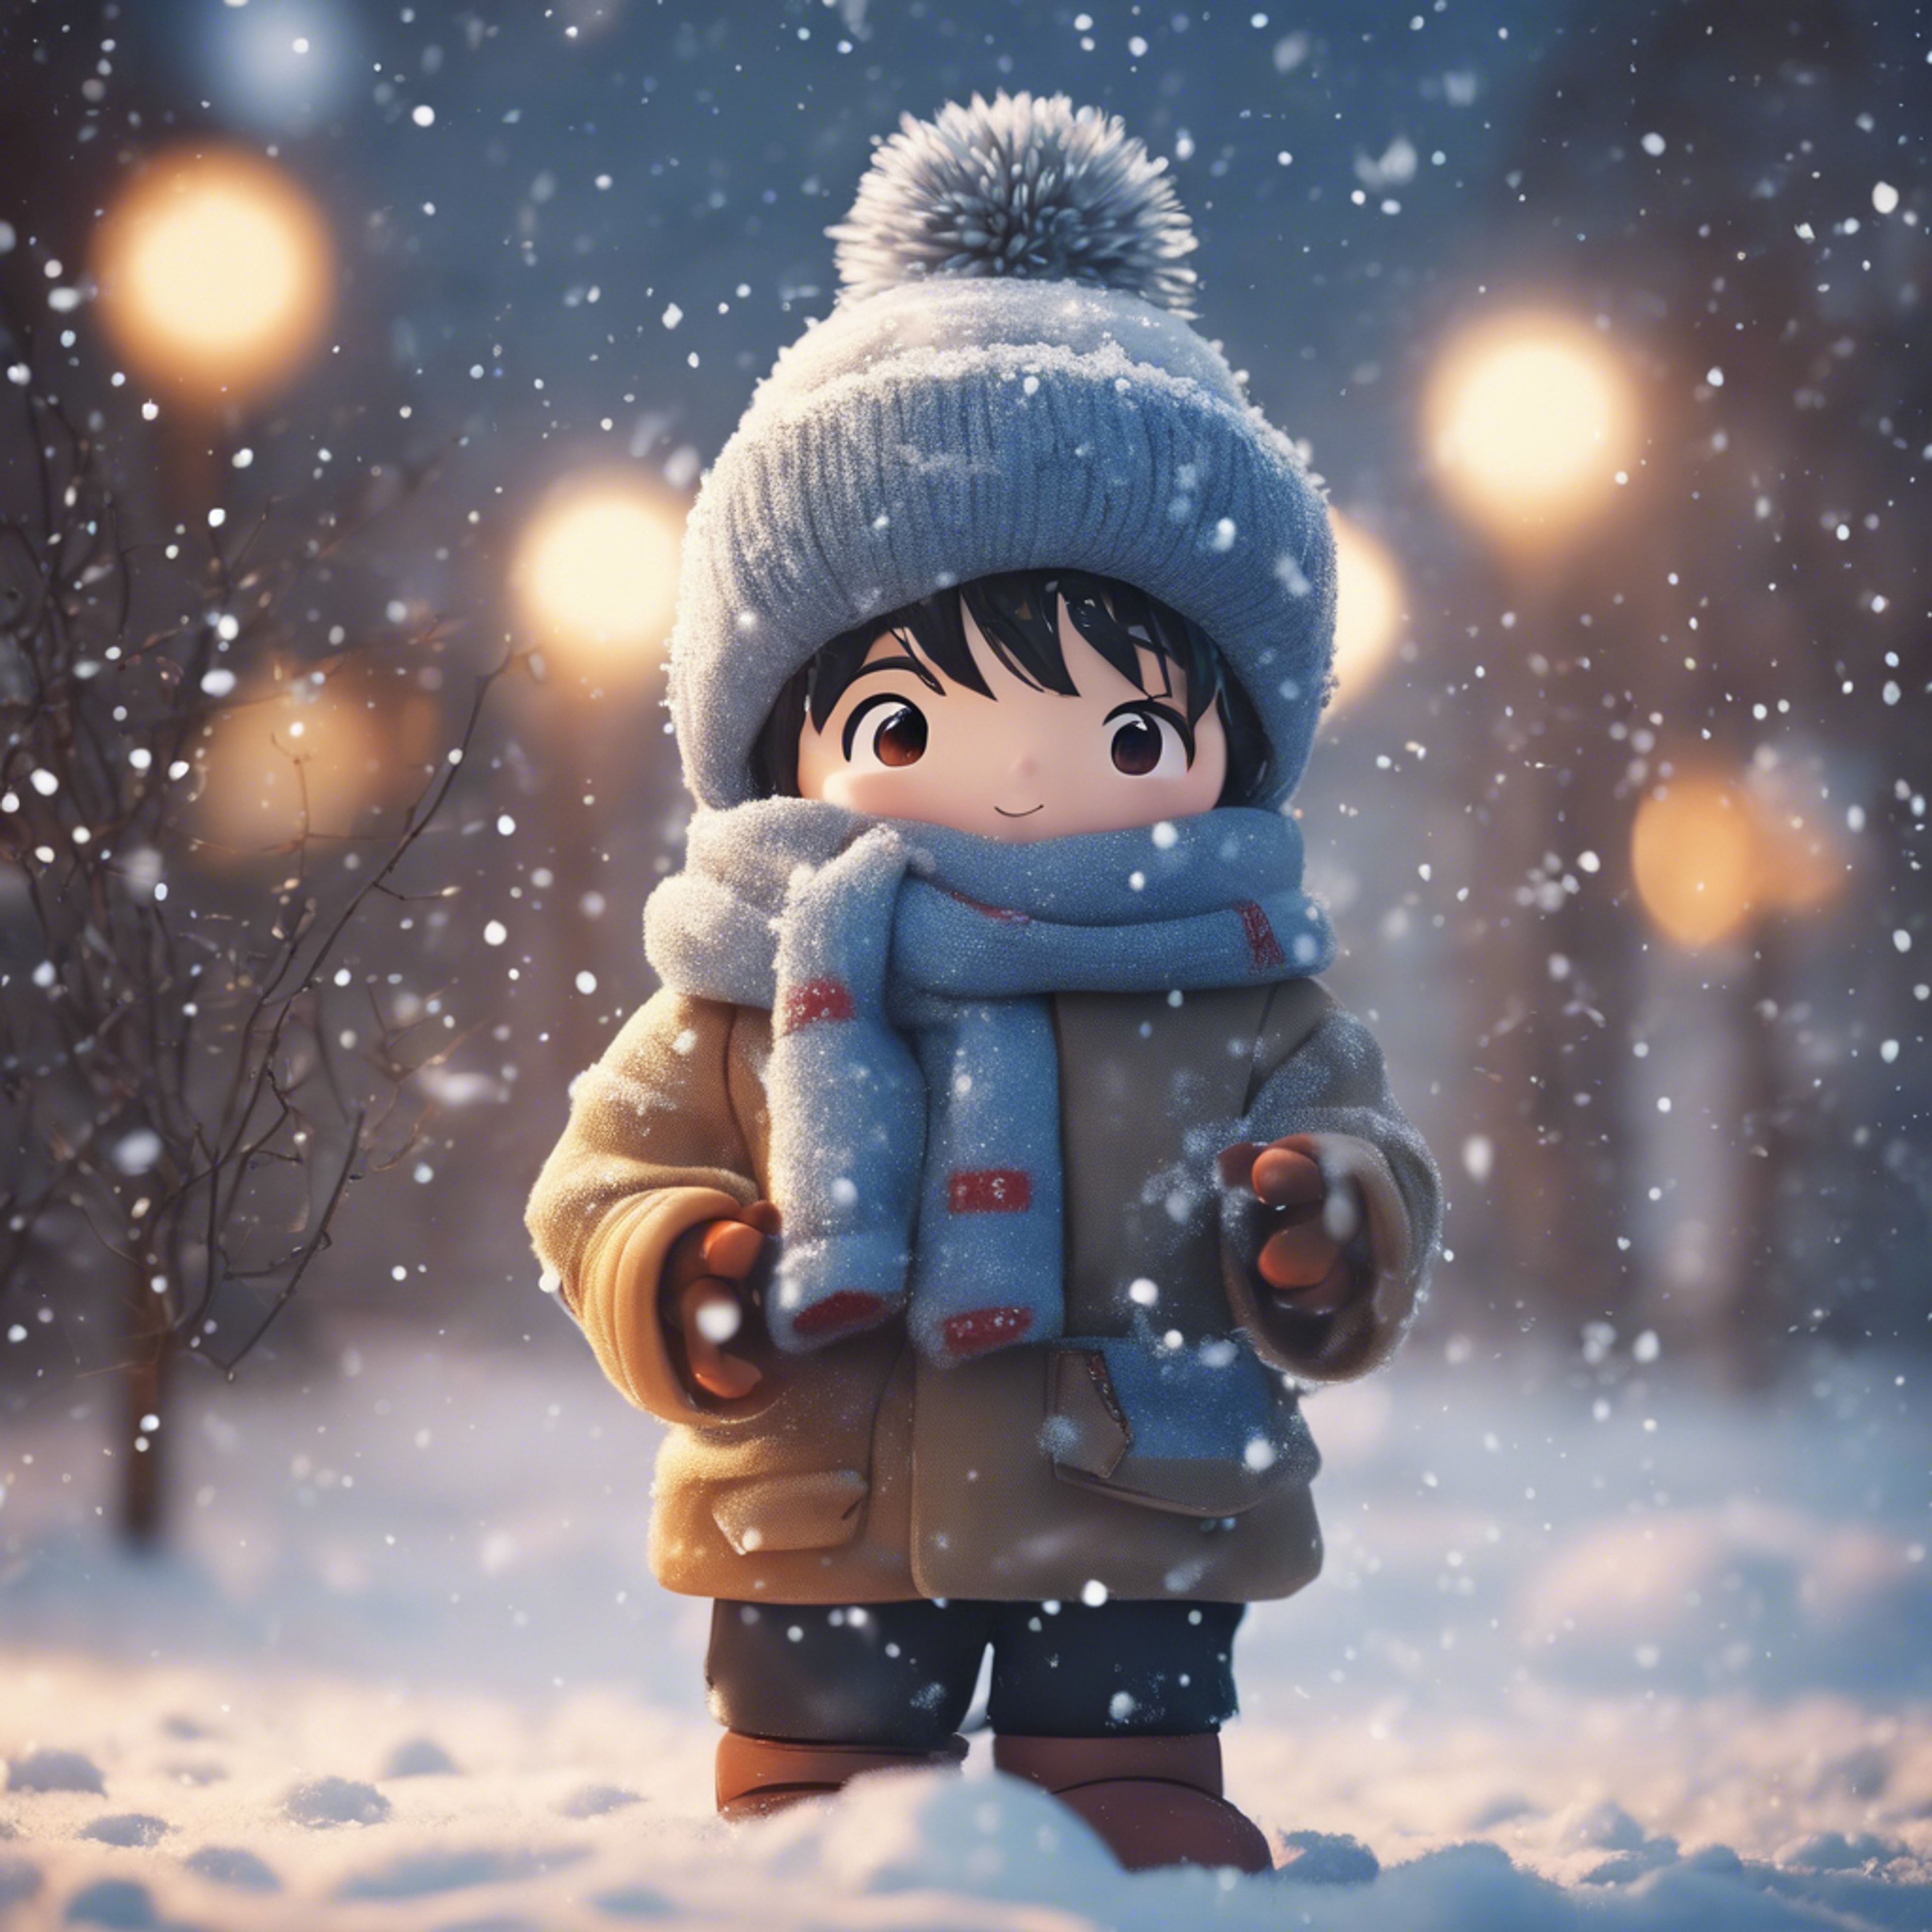 Anime boy wrapped in warm winter clothes, building a playful snowman in the snowfall. טפט[d4075dc9b13644f685e7]